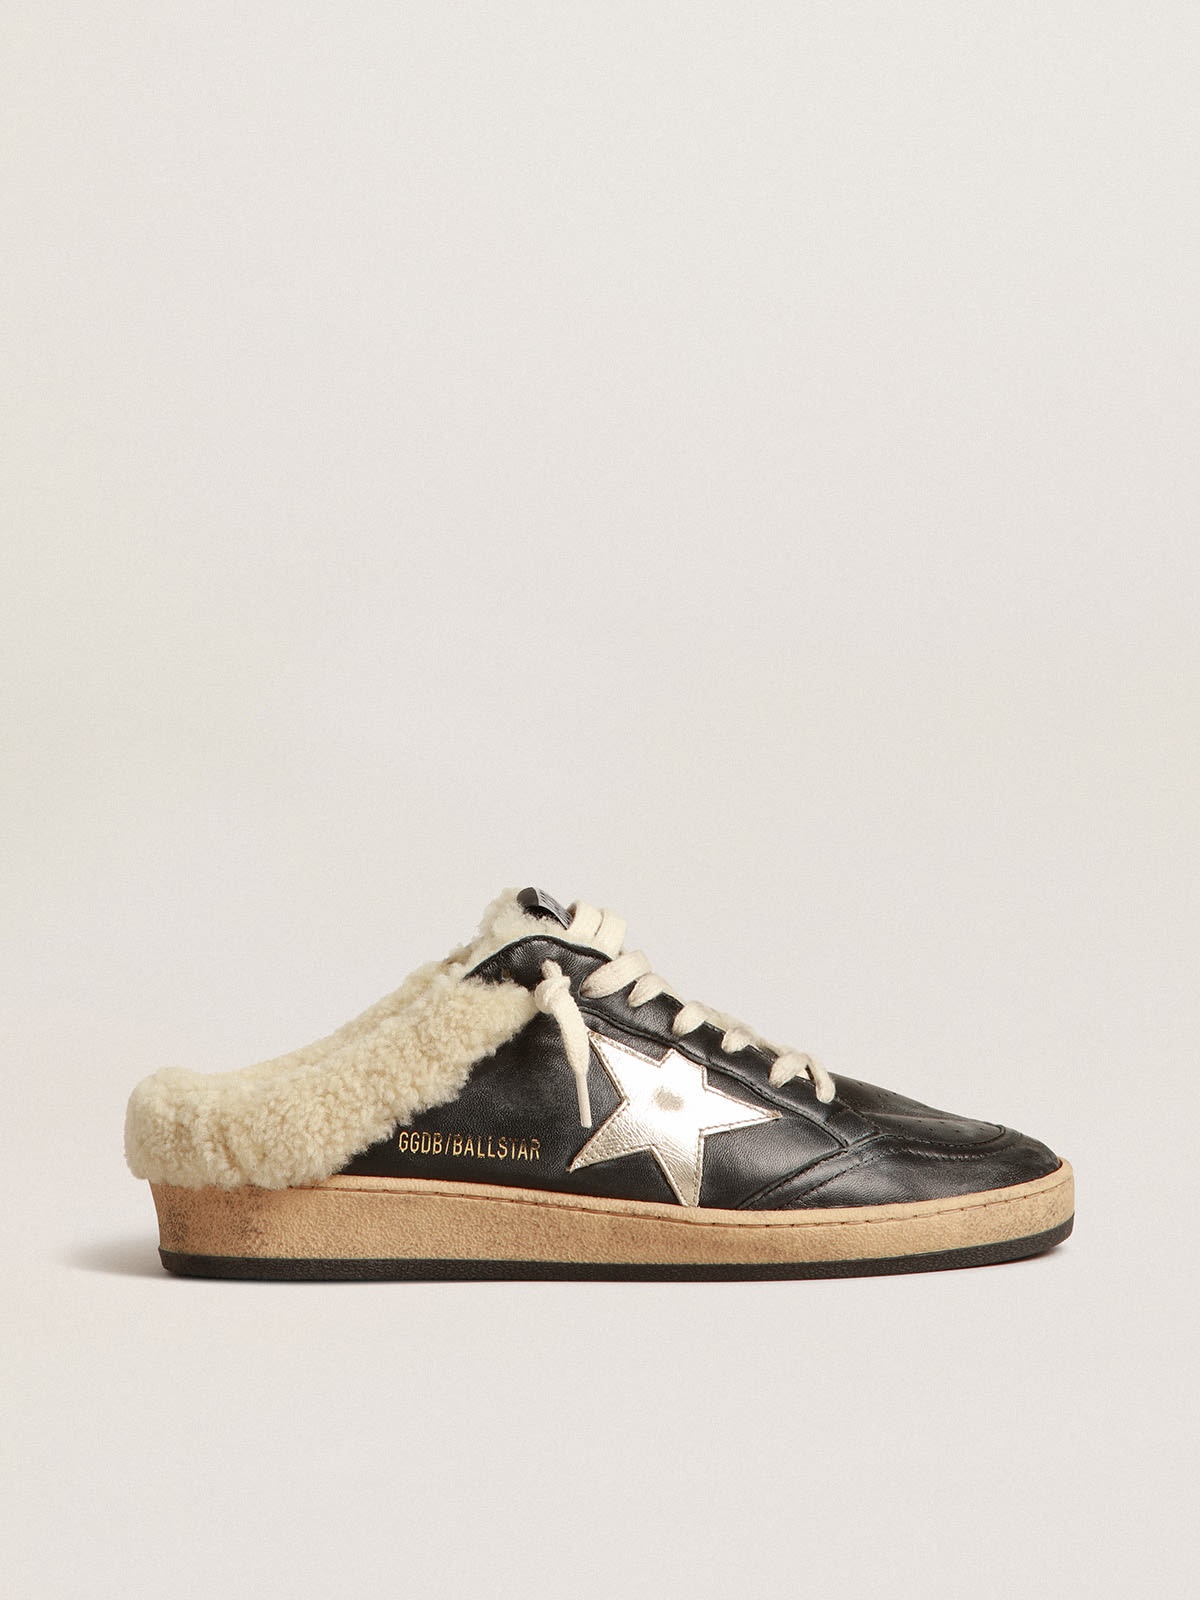 Golden Goose Ball Star Sabots in nappa with platinum star and shearling  lining | REVERSIBLE